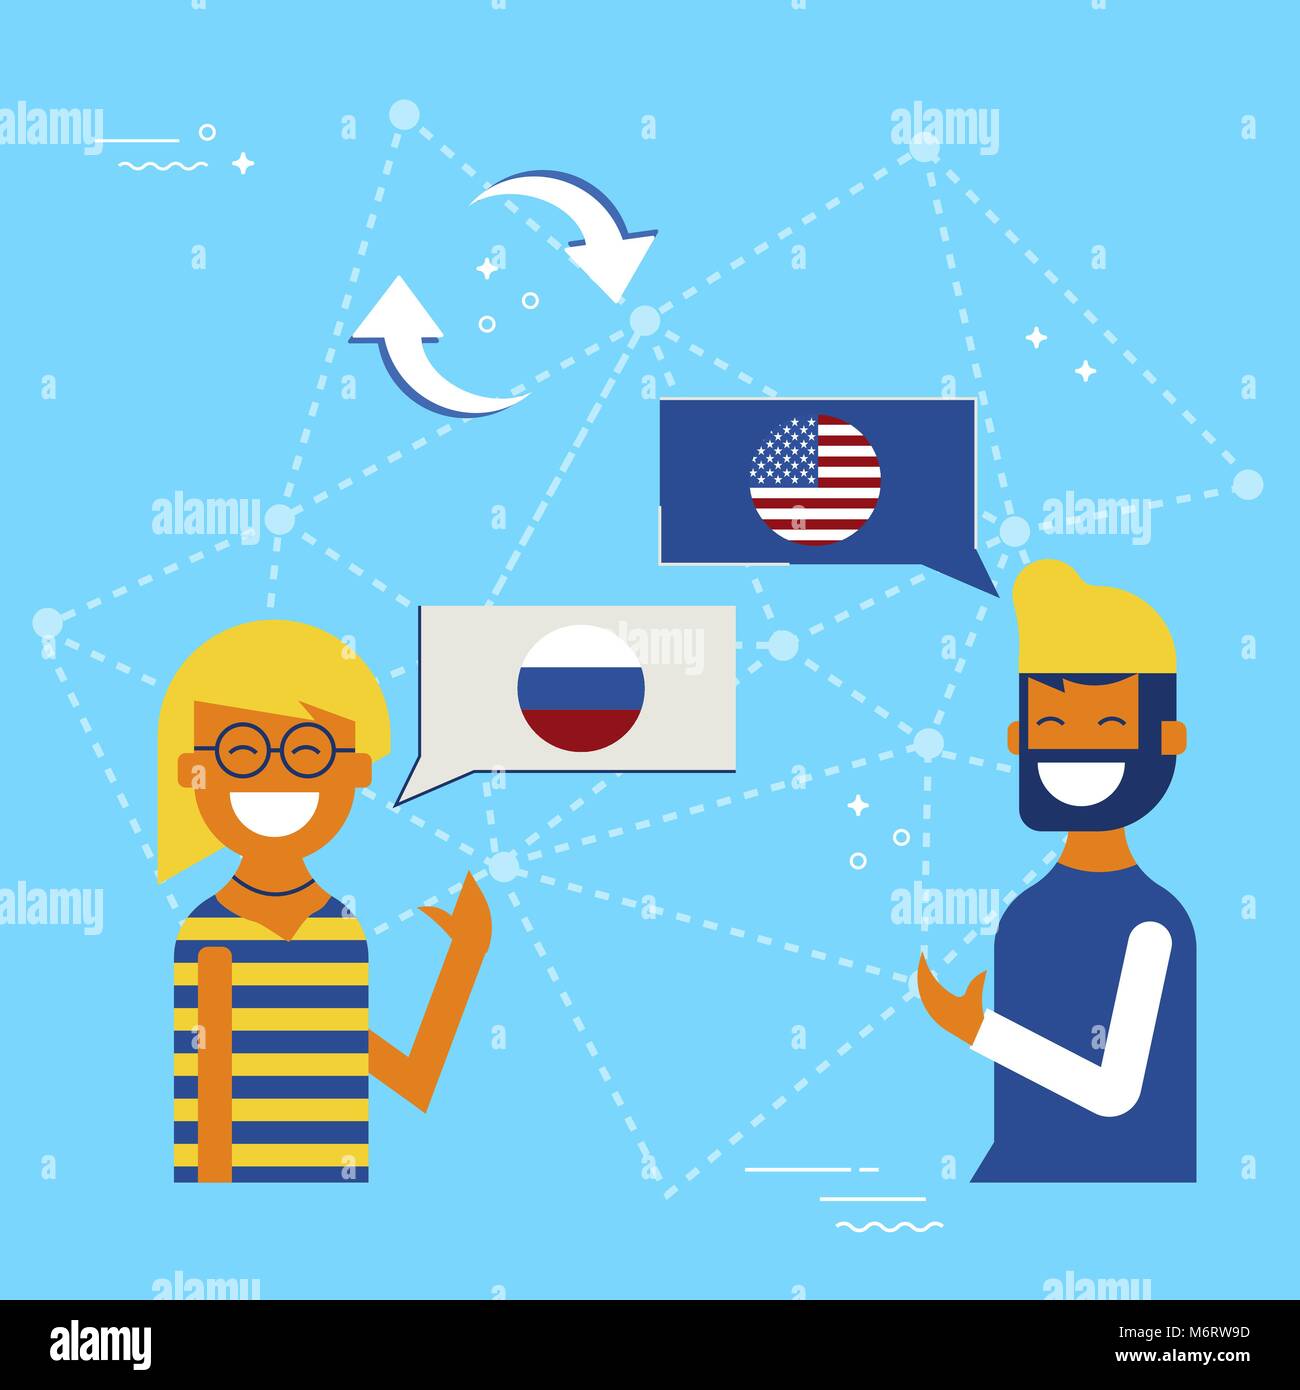 Friends from Russia and USA translating online conversation. International communications translation concept illustration. EPS10 vector. Stock Vector